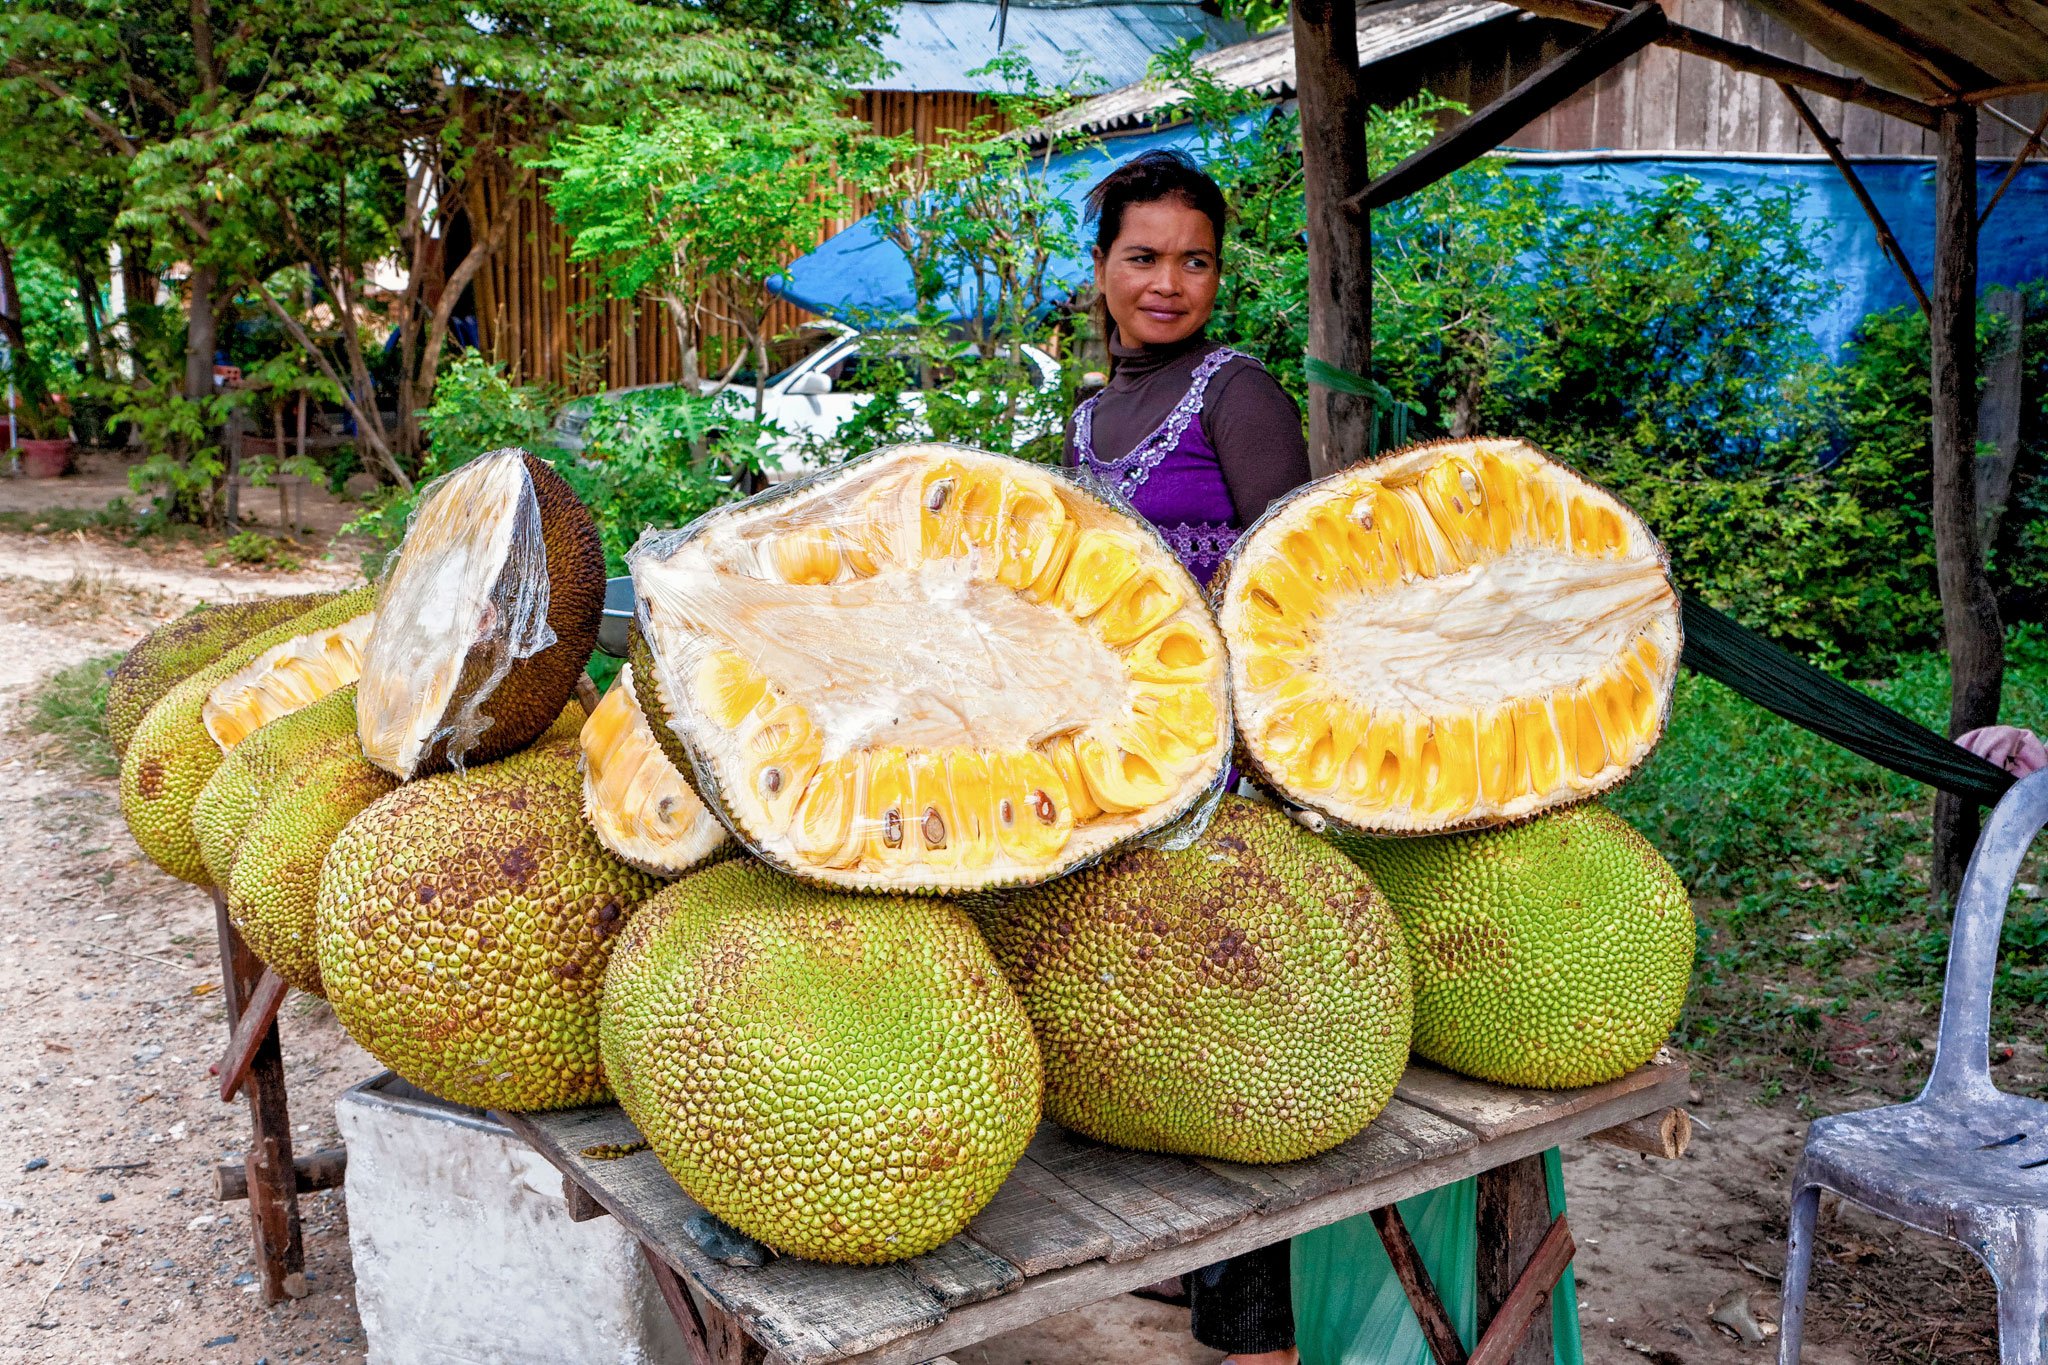 13 Interesting Facts About Jackfruit You Didn’t Know